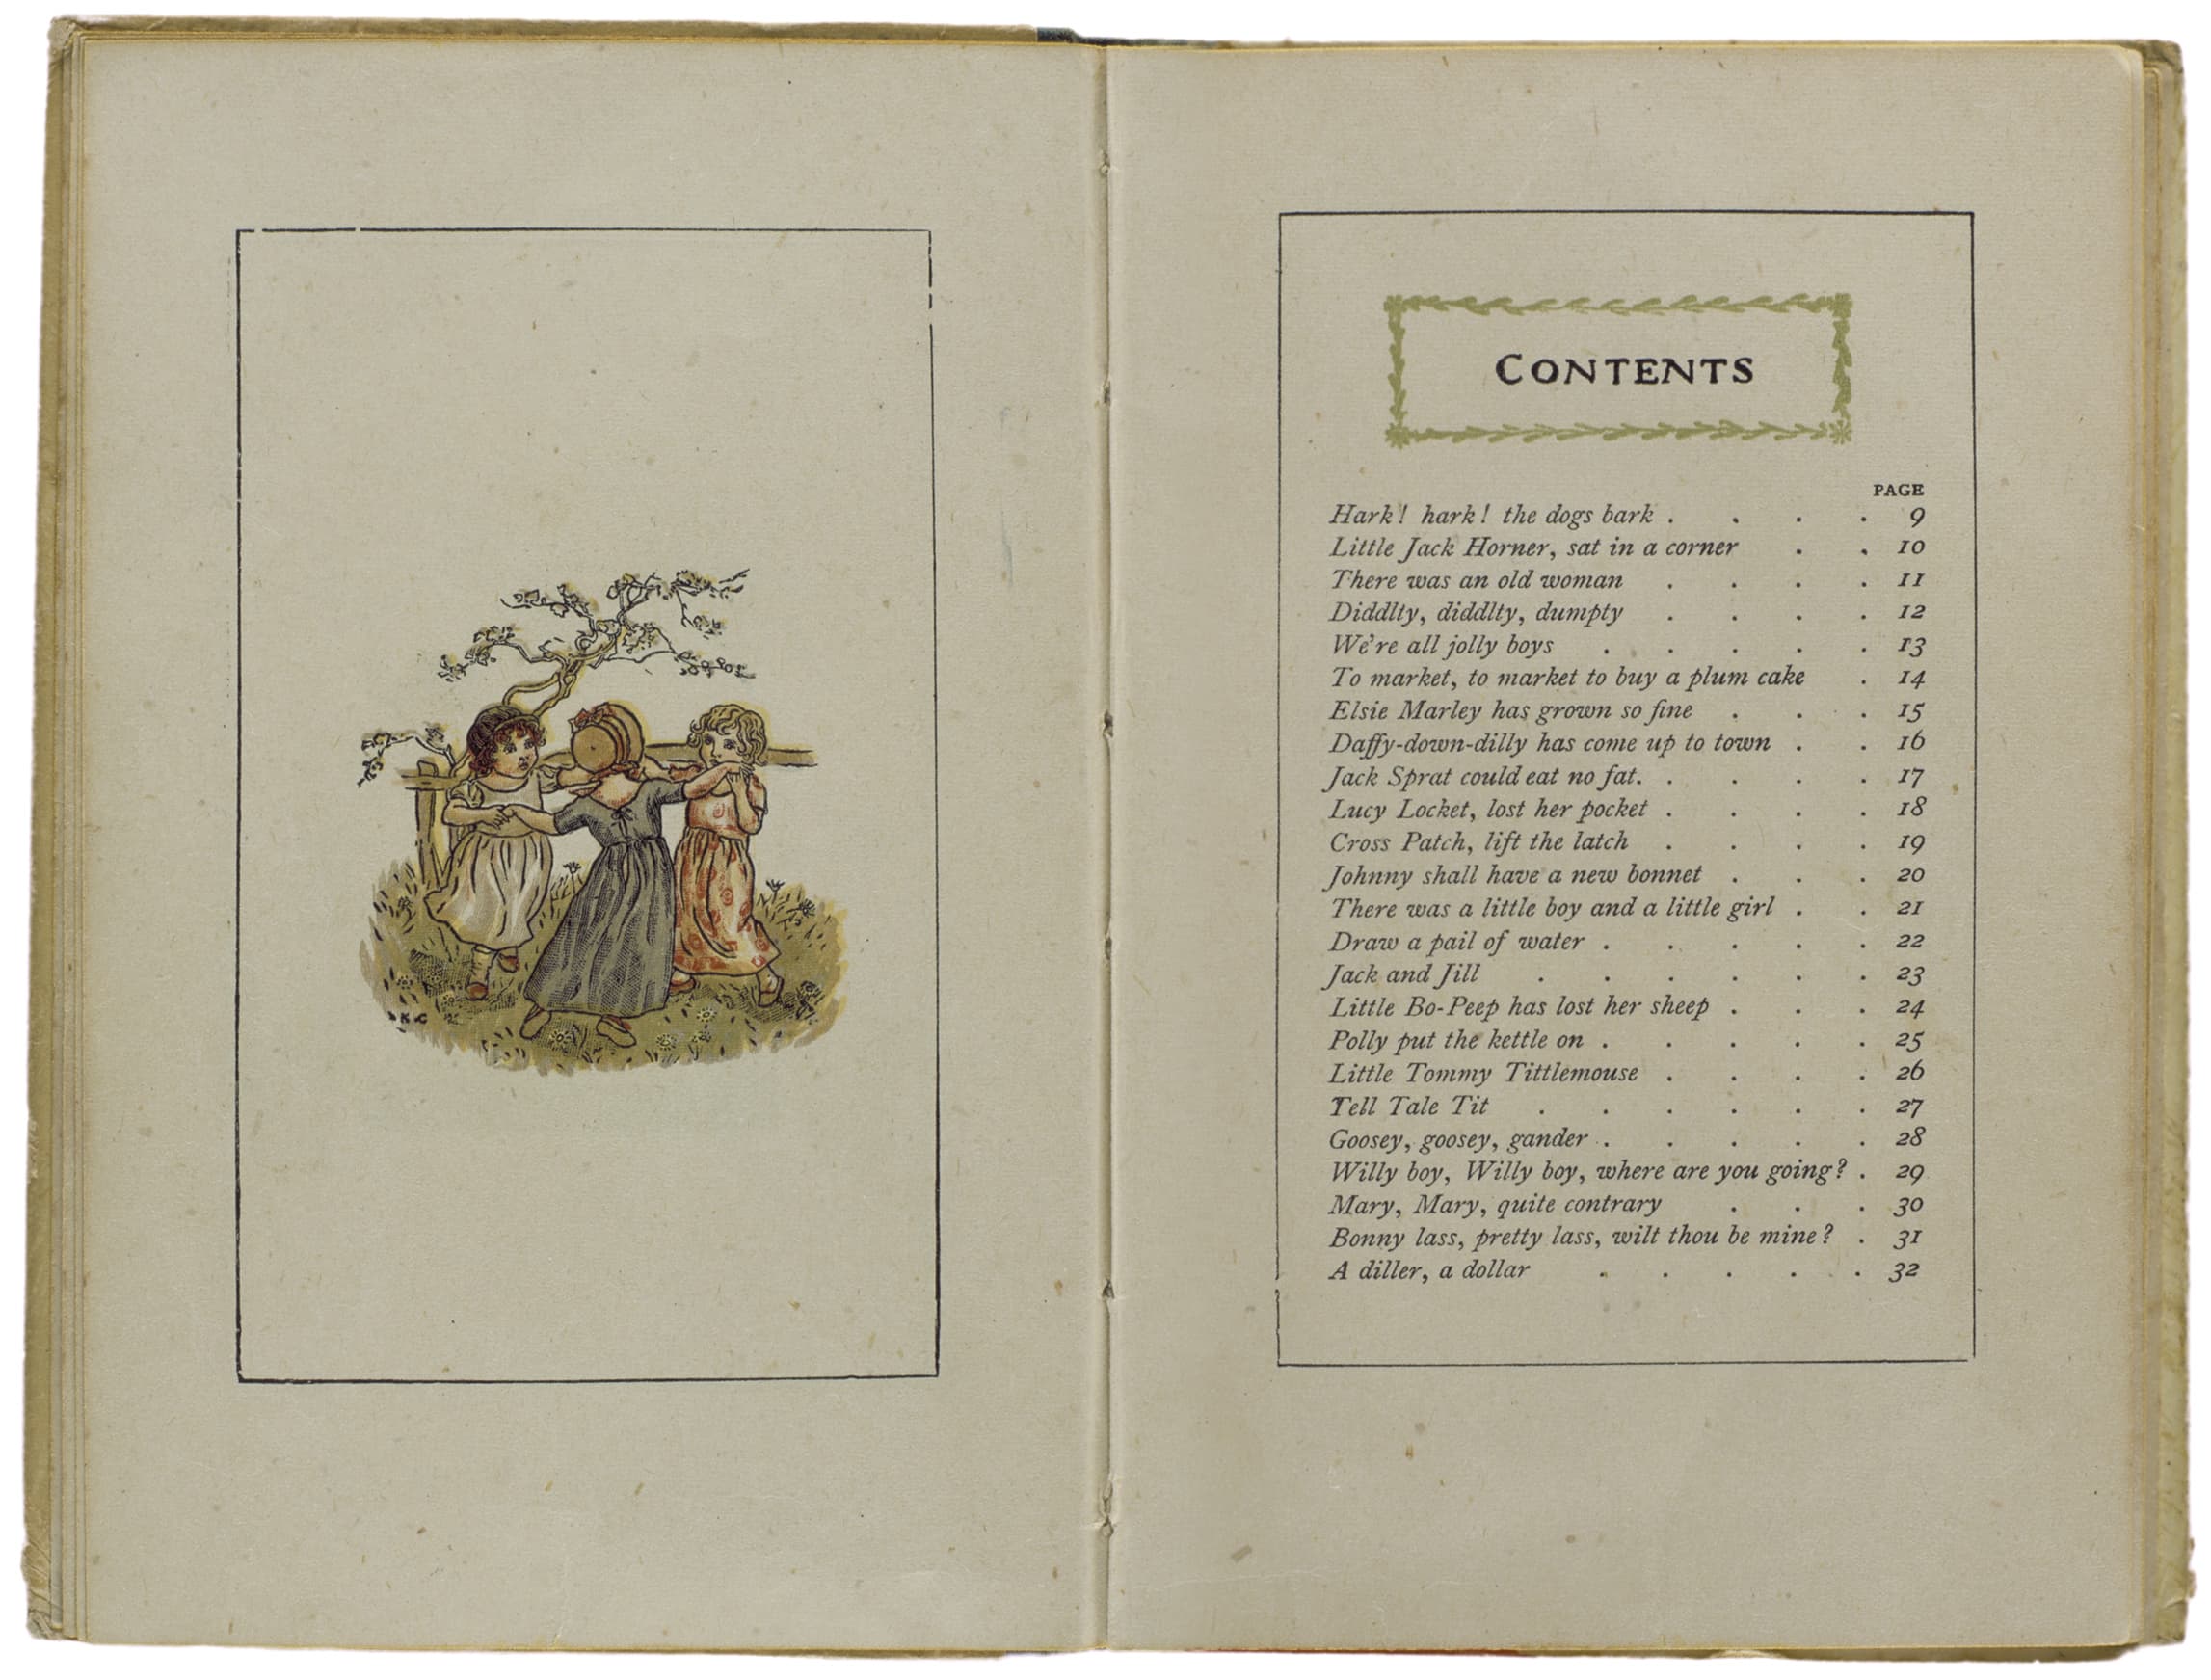 page 6-7 of Mother Goose, contents